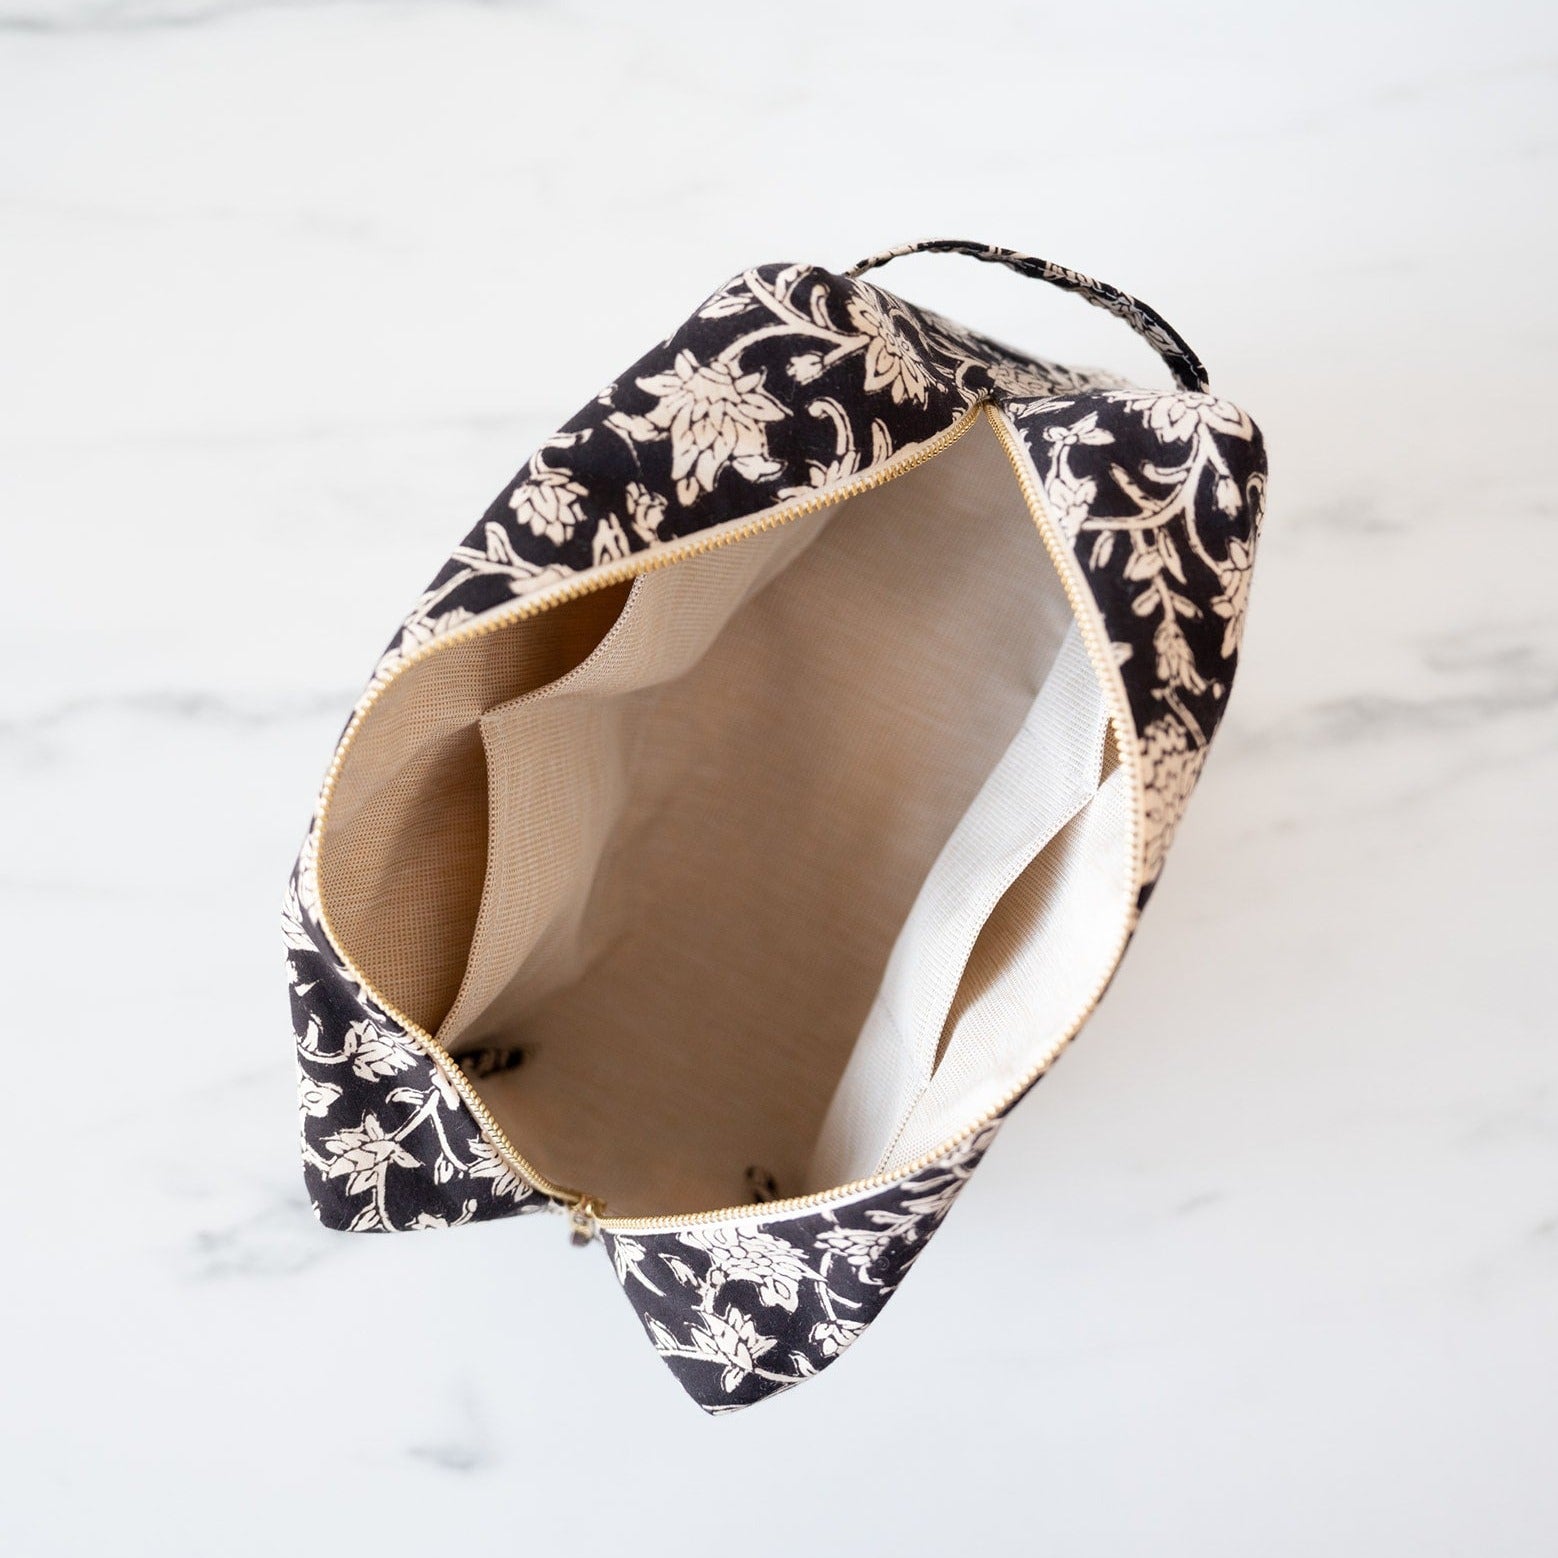 Block print toiletry bag with interior pockets